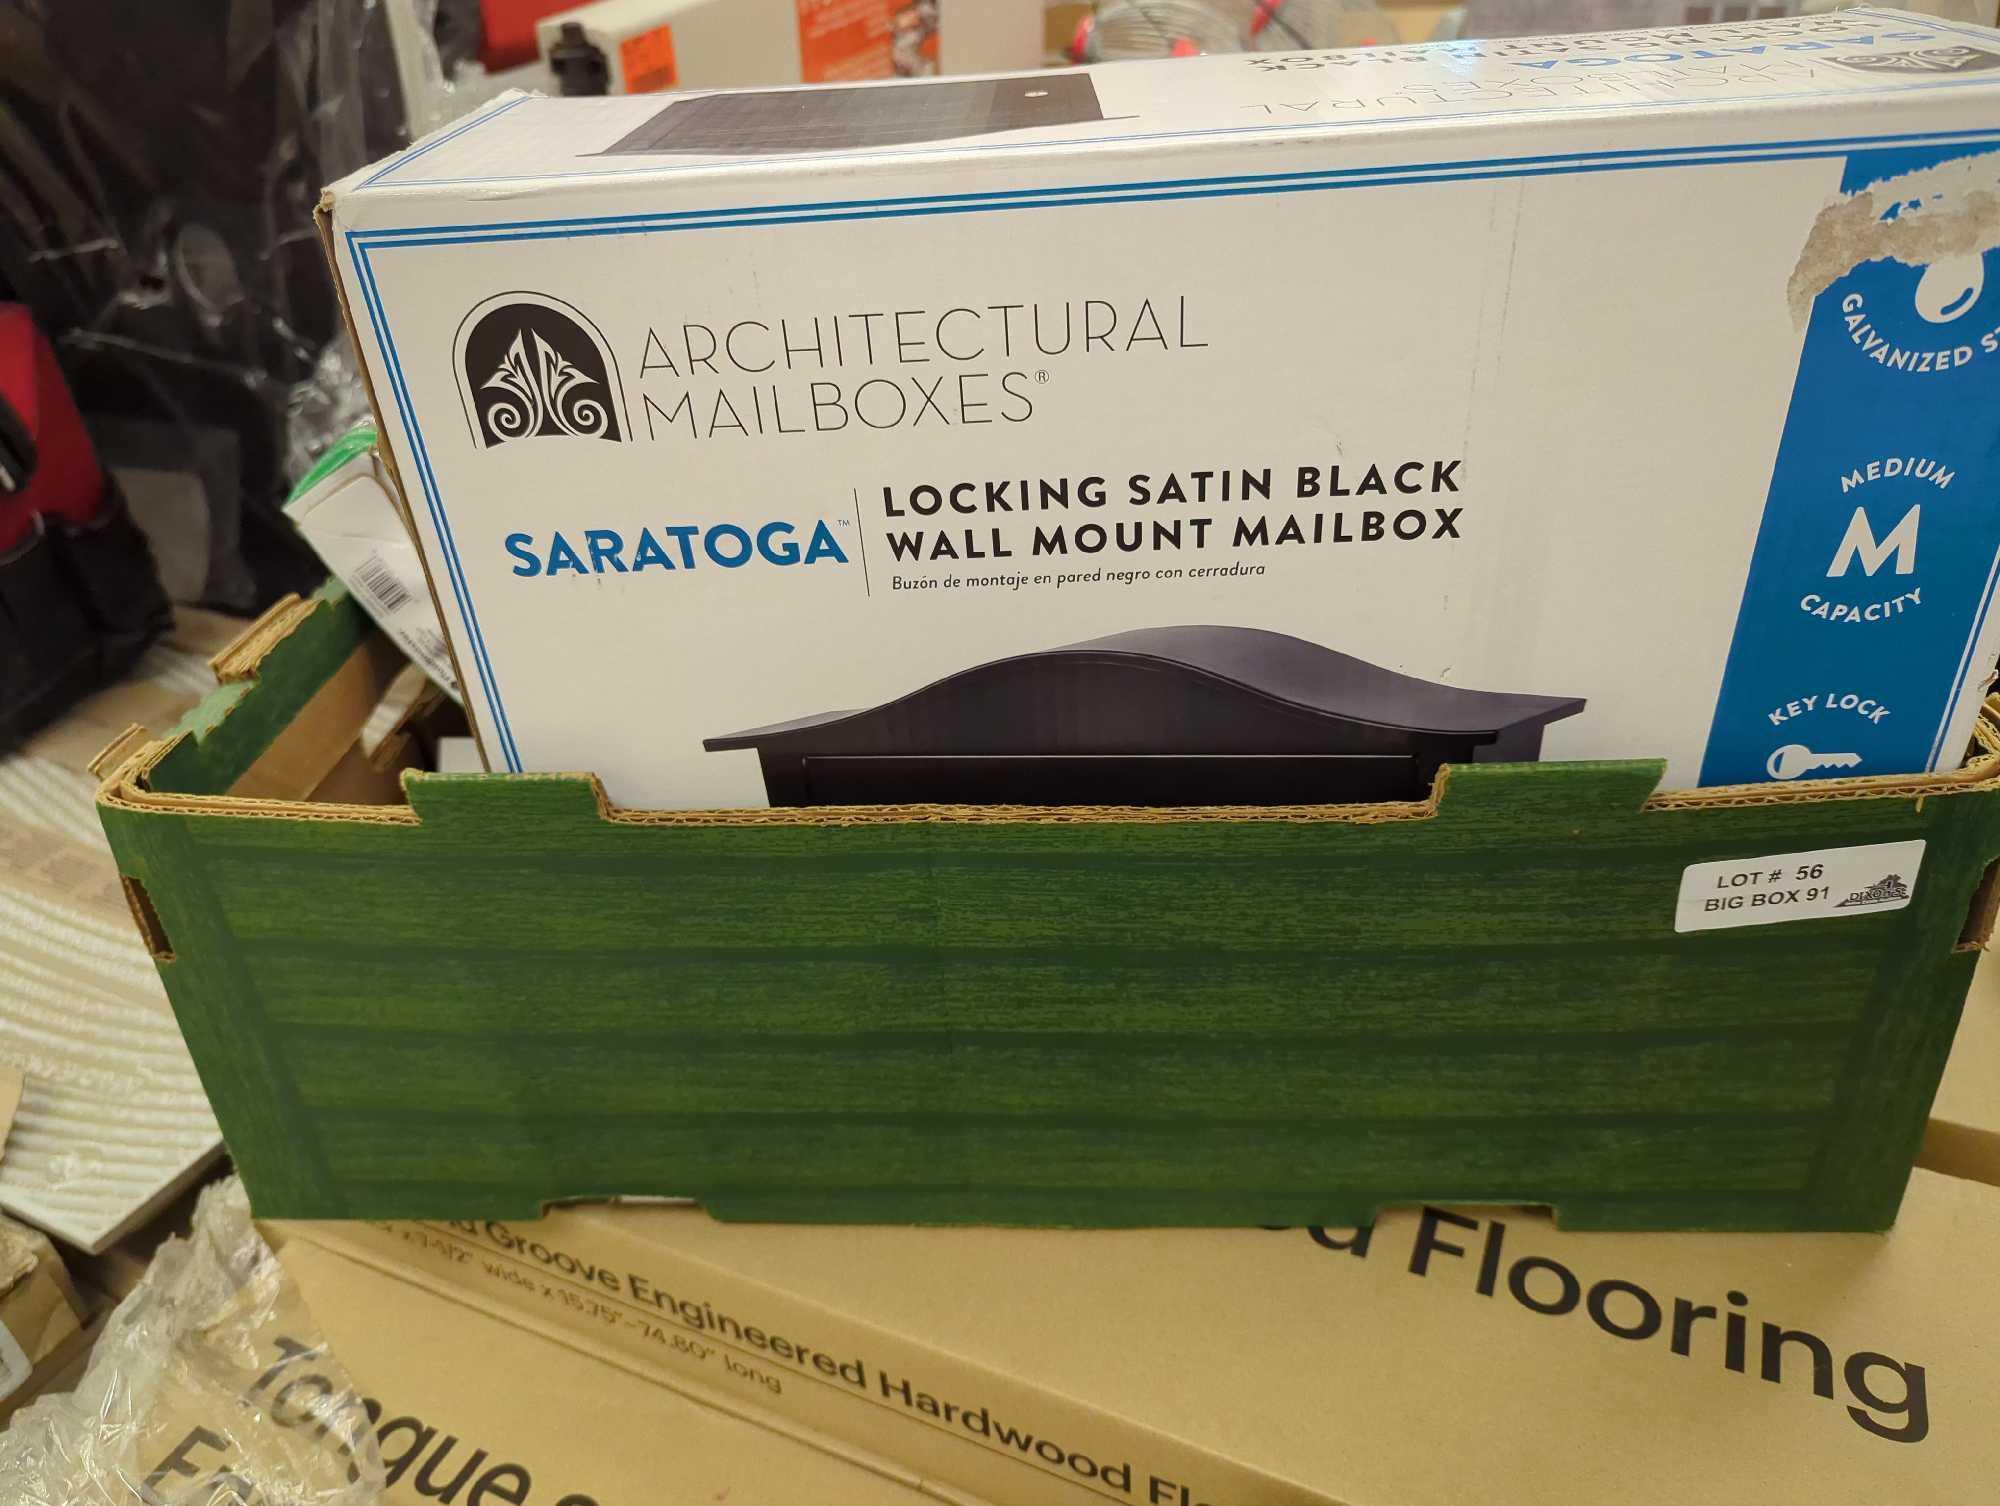 Box Lot of Assorted Items to Include, Architecture Mailboxes Saratoga Locking Satin Black Wall Mount